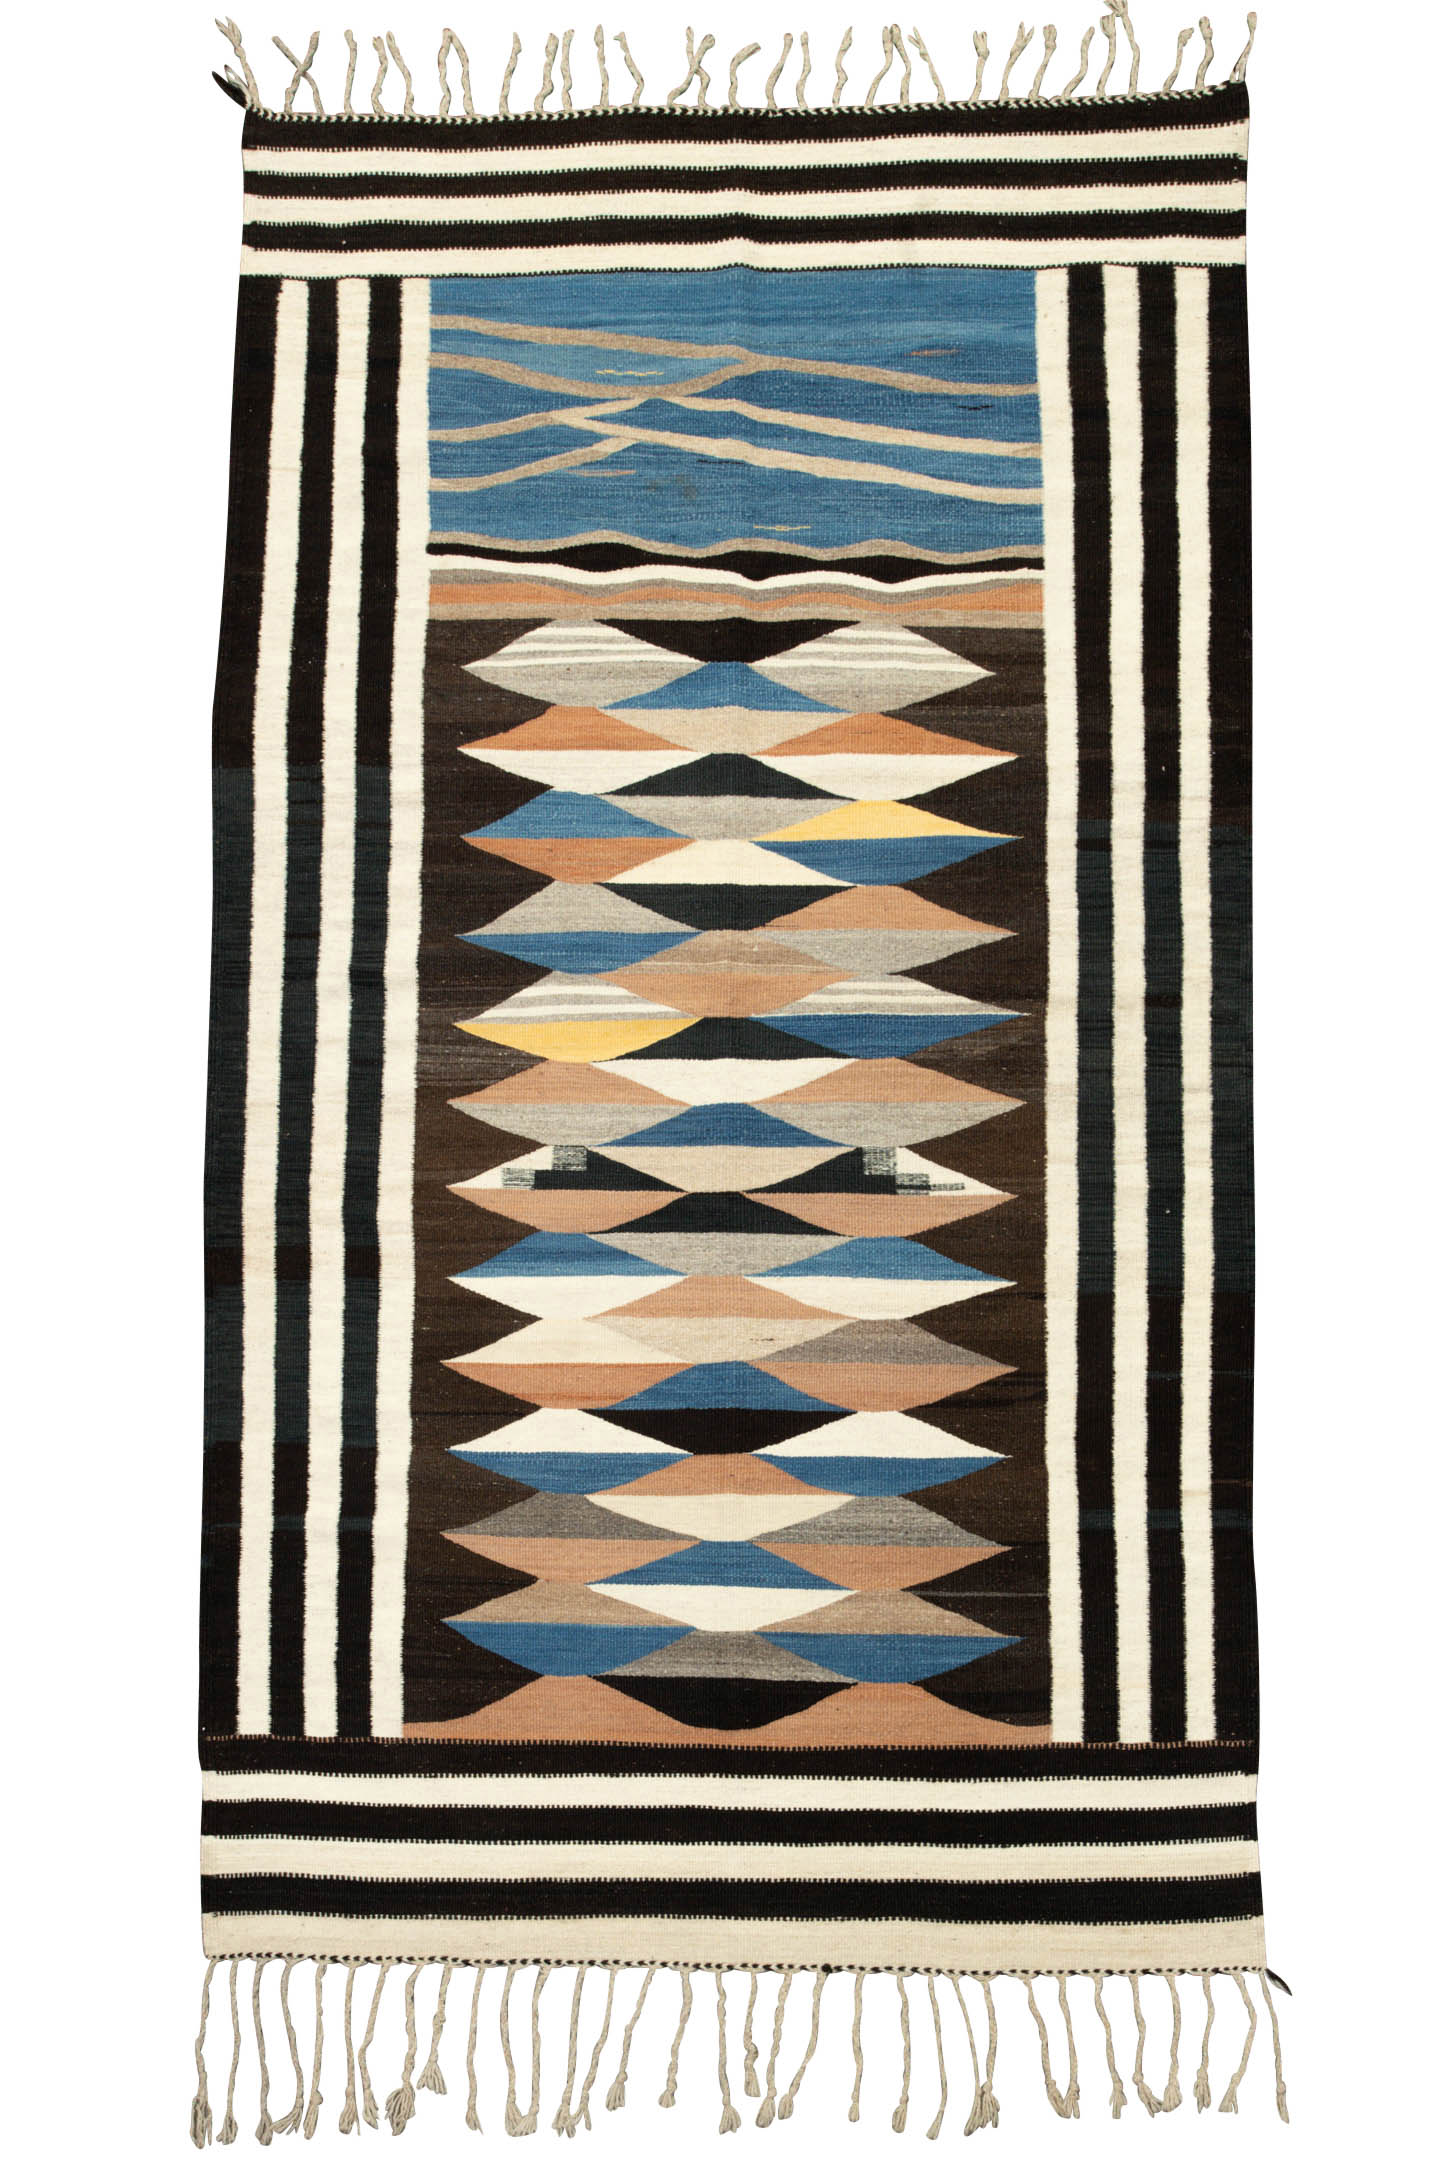 POSTCARD 2 Moroccan Flat Weave Accent Rug - 7'7 x 4'2